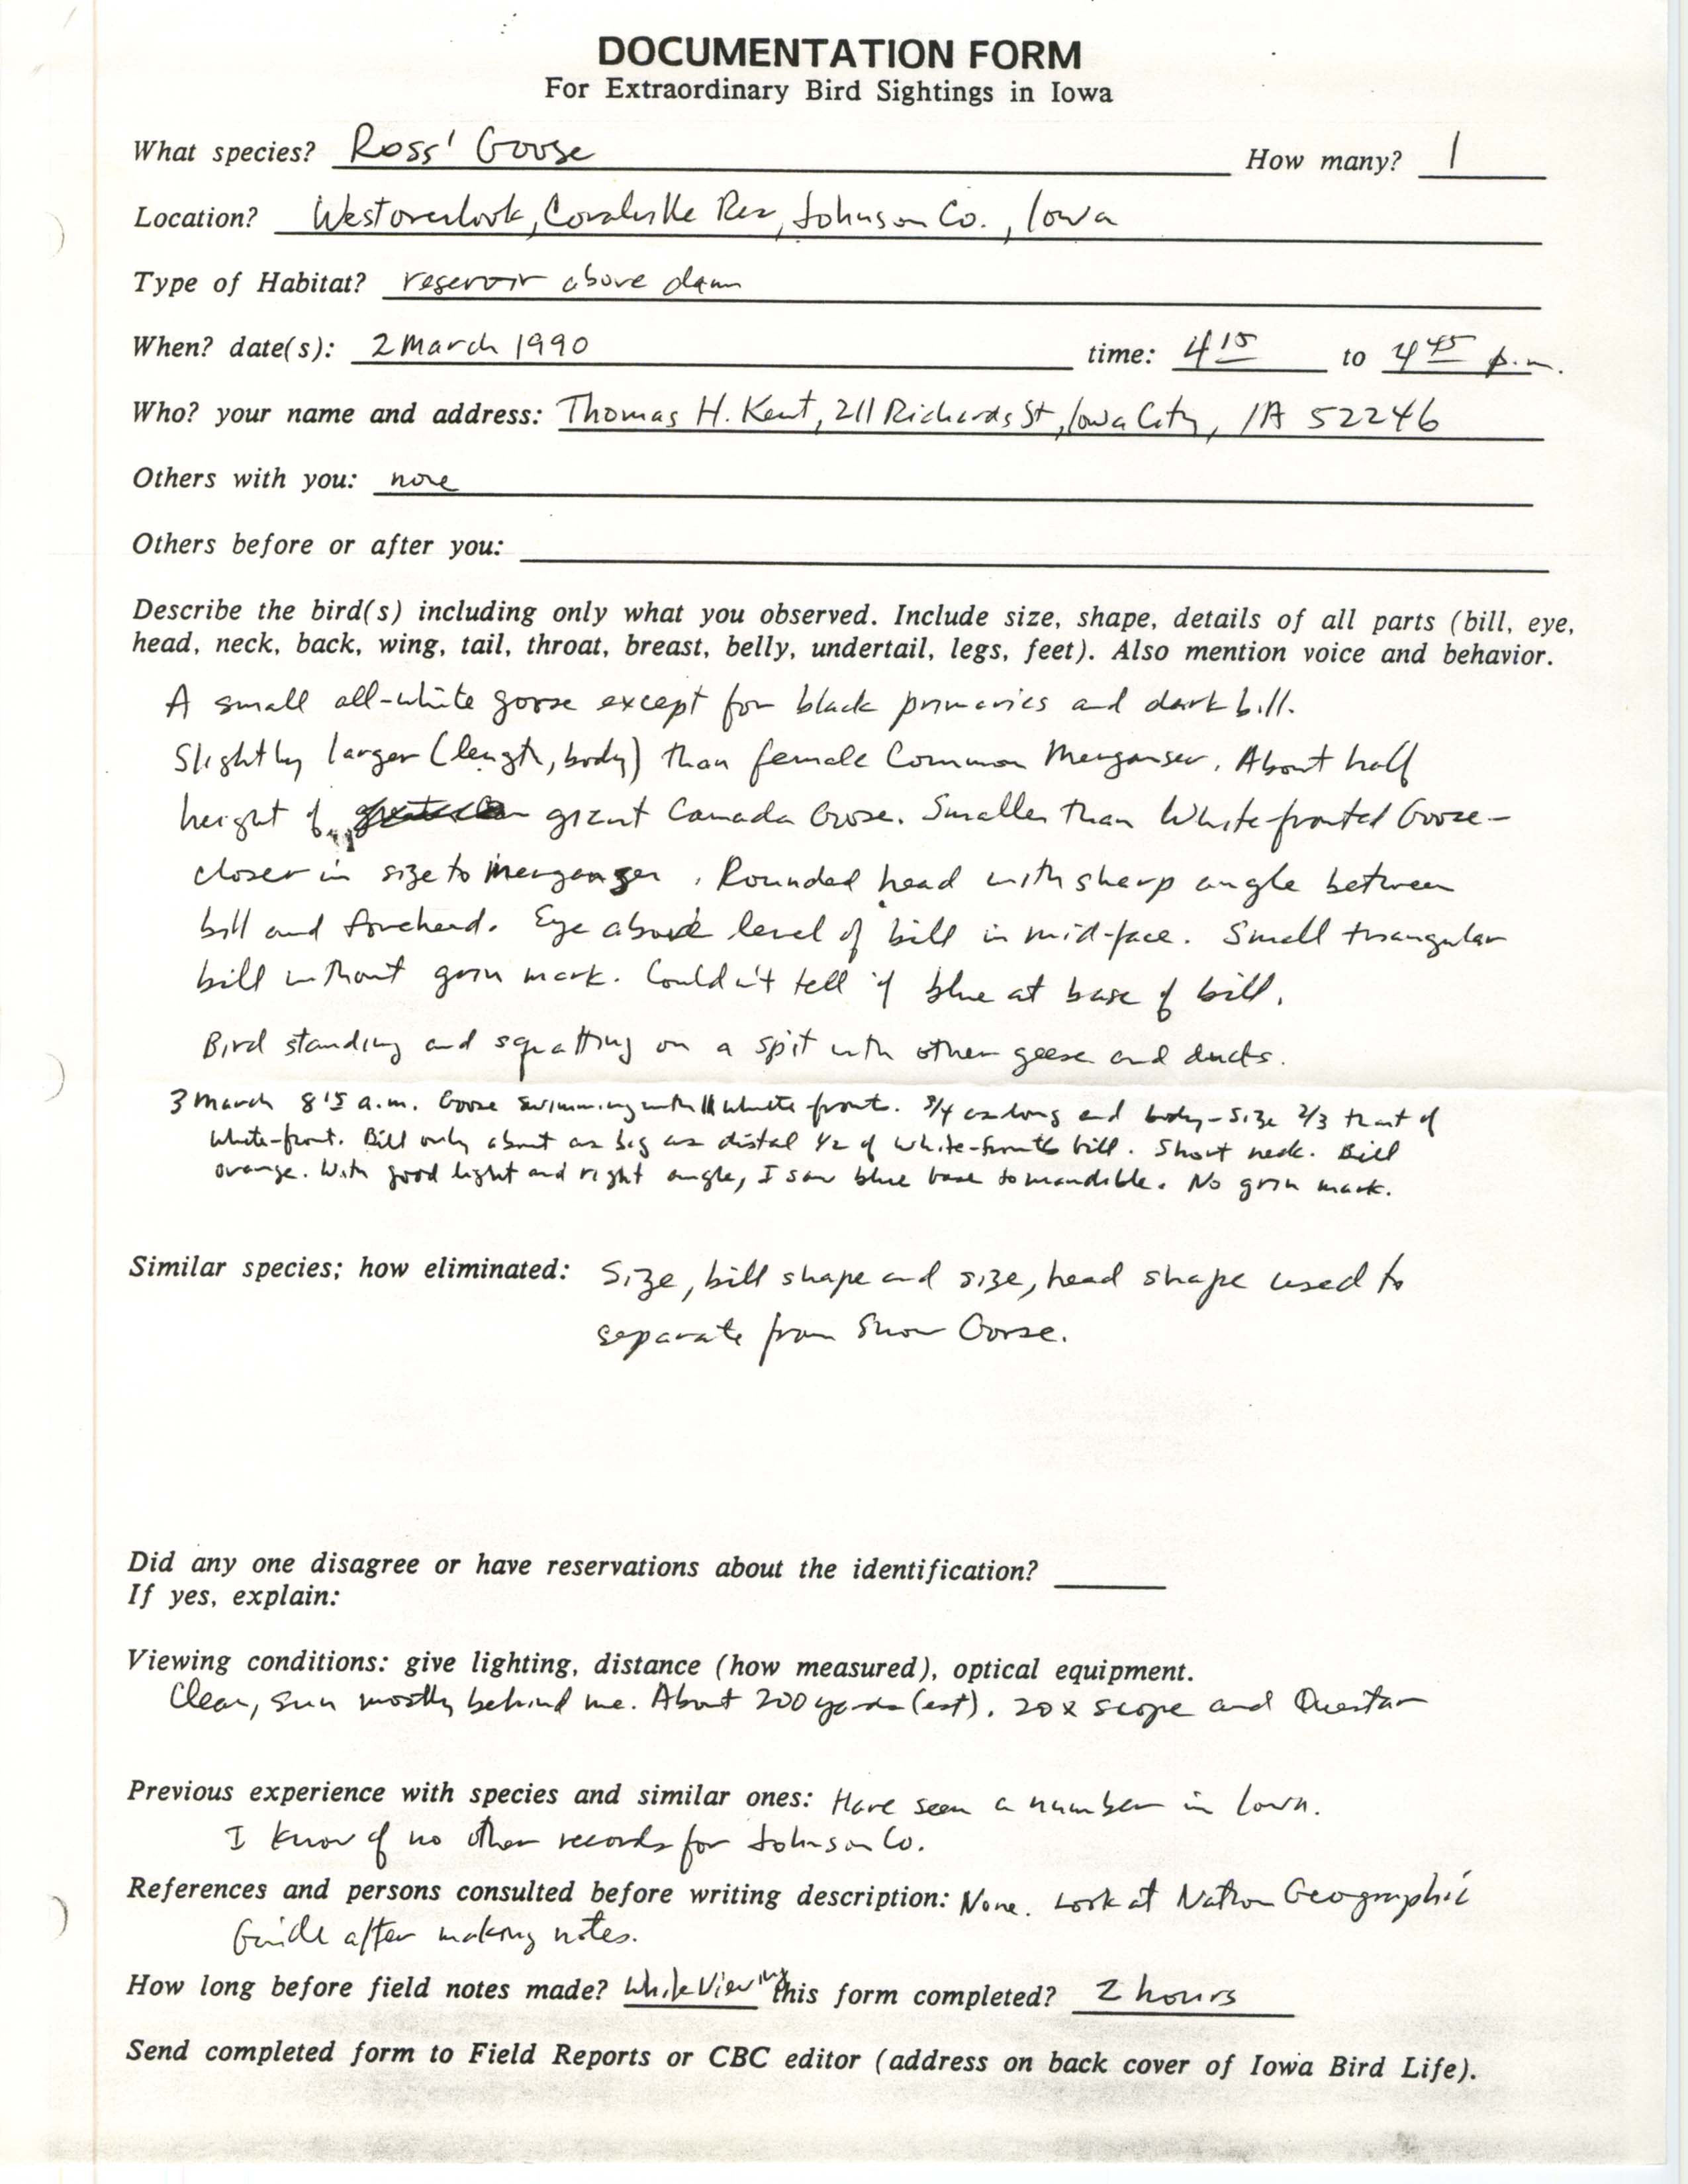 Rare bird documentation form for Ross' Goose at West Overlook at Coralville Reservoir, 1990